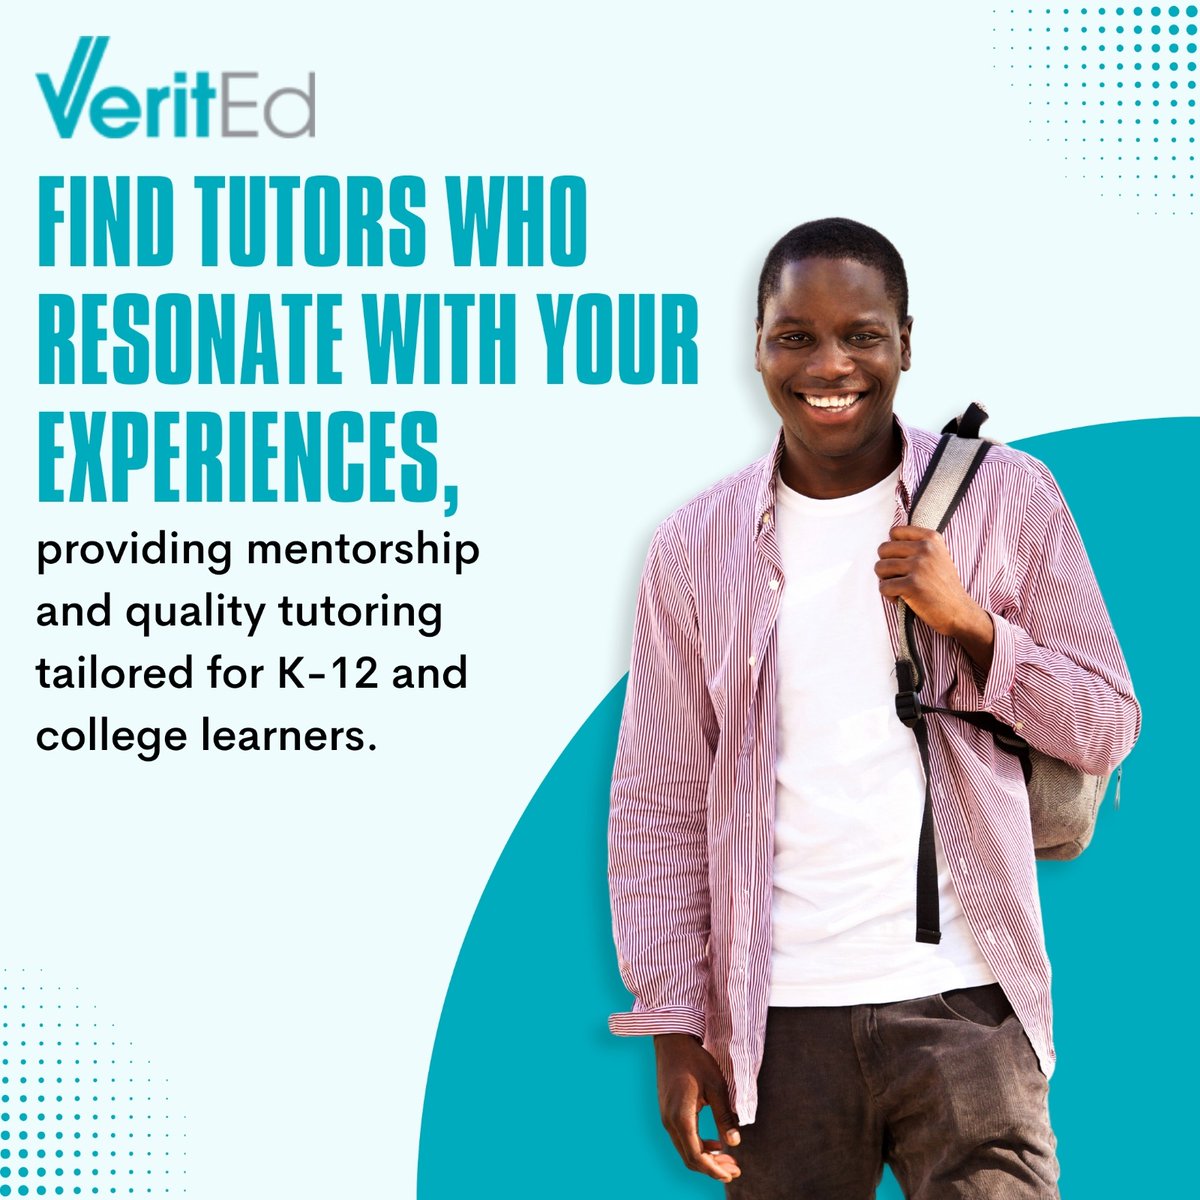 Experience the difference with VeritEd and unlock your full potential. Let's embark on a journey of growth, knowledge, and success together! 🌟🎓
.
.
#VeritEd #ElevateEducation #PersonalizedTutoring #Mentorship #HighAchievers #QualityEducation #AffordableTutoring